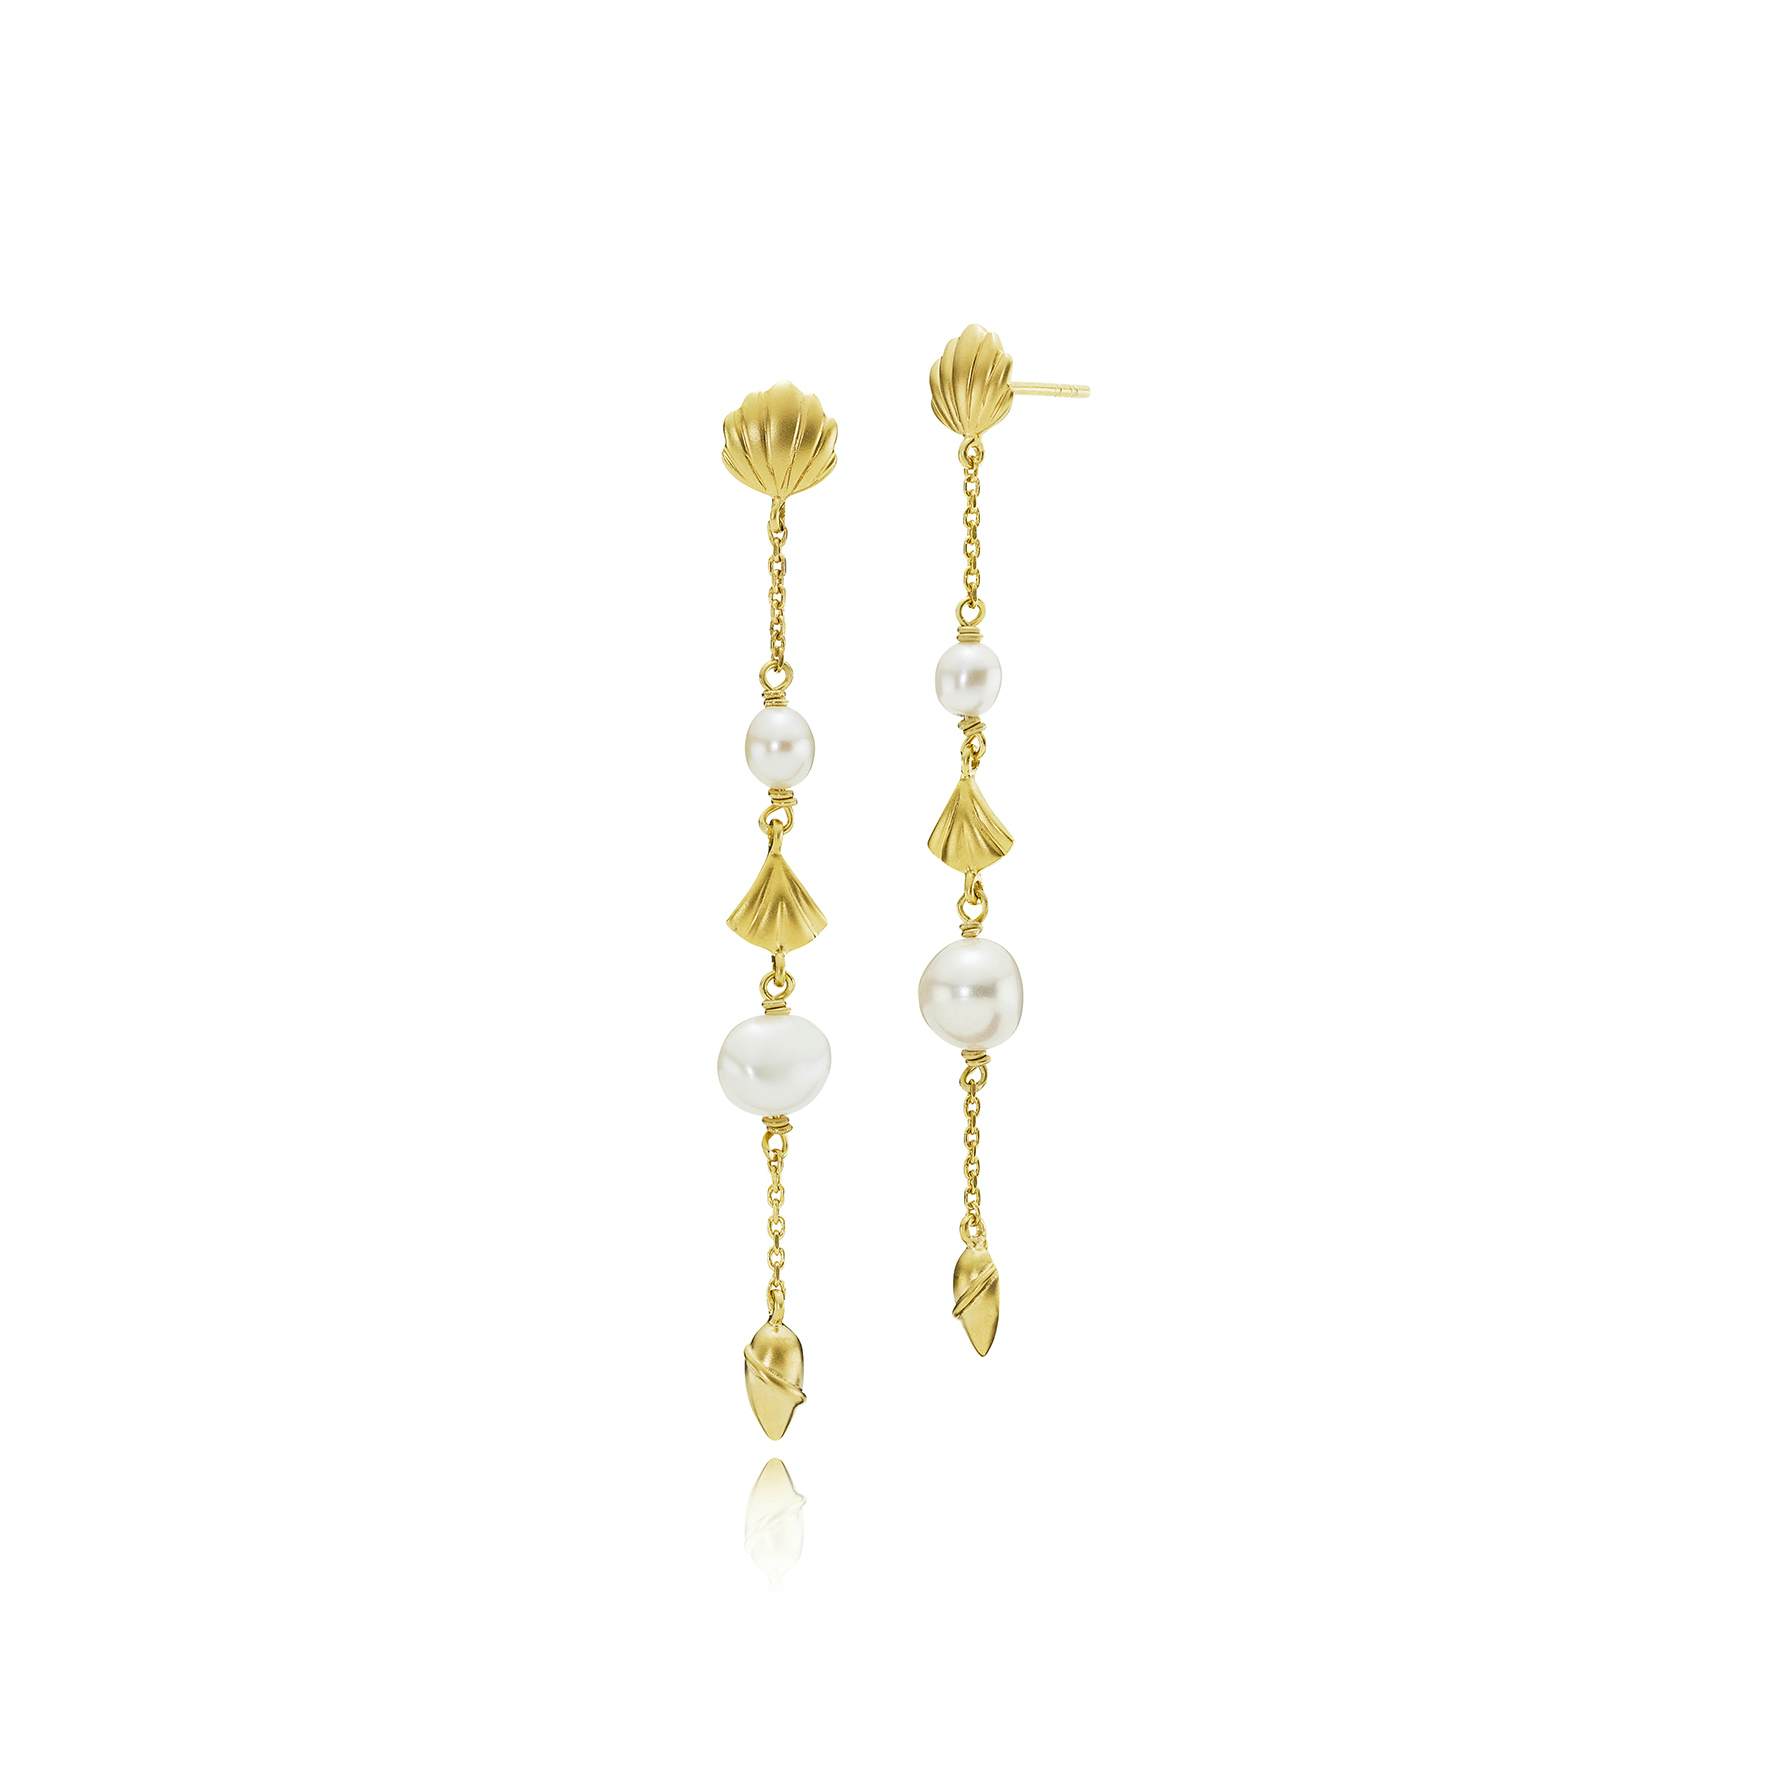 Isabella White Long Earrings from Izabel Camille in Goldplated-Silver Sterling 925